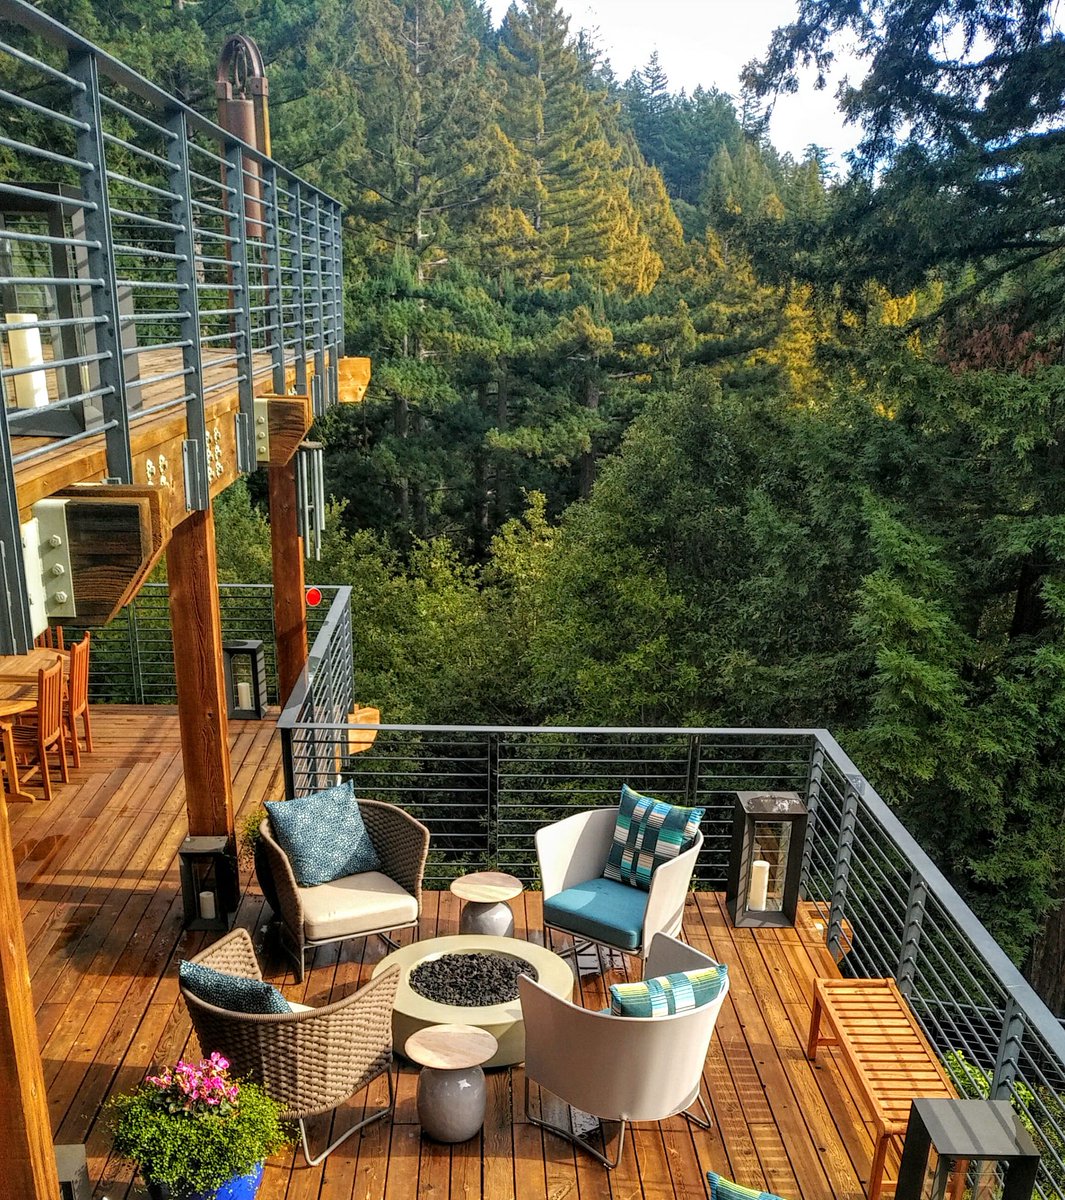 Chillin Among The Treetops #CanyonRanchWoodside 
@CanyonRanch #treehouse #redwoods #weekendgetaway #luxuryresort #healthyliving #spa #Canyonranch #NetJets @NetJets #styletravel unnamedproject.com/featured/canyo…